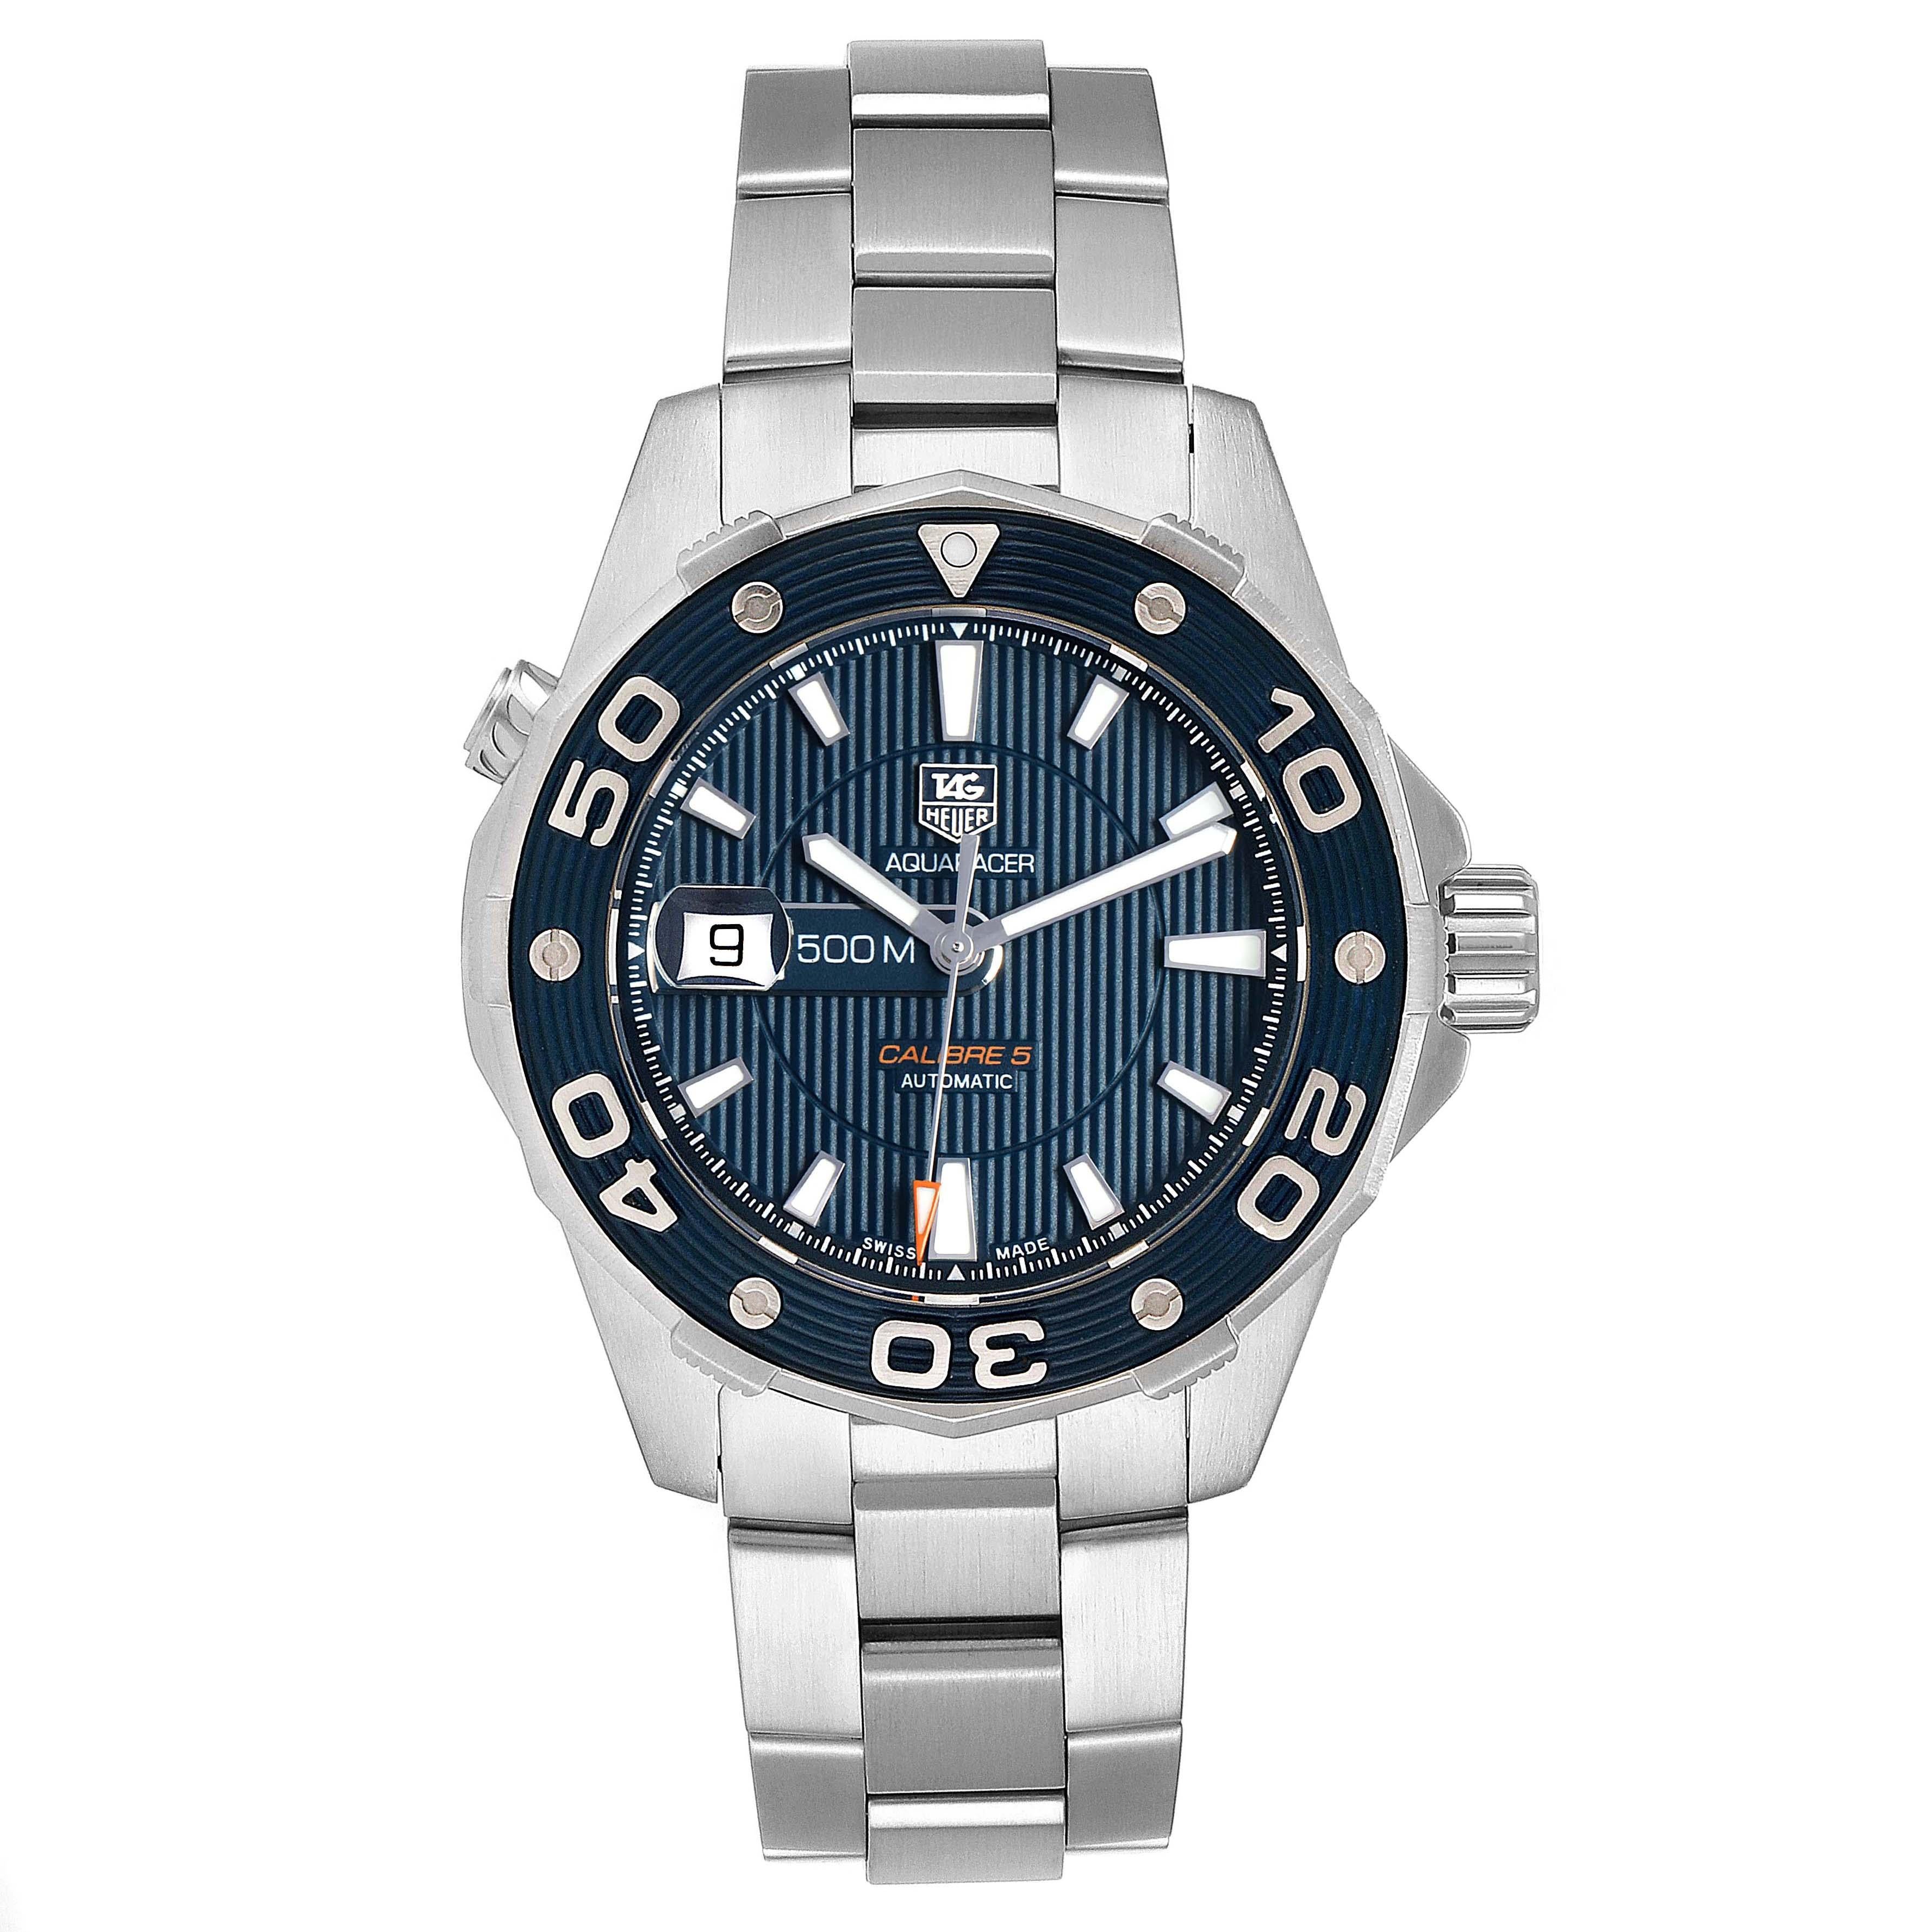 Tag Heuer Aquaracer Blue Dial Steel Mens Watch WAJ2112 Box Card. Automatic self-winding movement. Stainless steel case 43.0 mm in diameter. Exhibition case back. Blue unidirectional rotating bezel. Scratch resistant sapphire crystal. Blue dial with